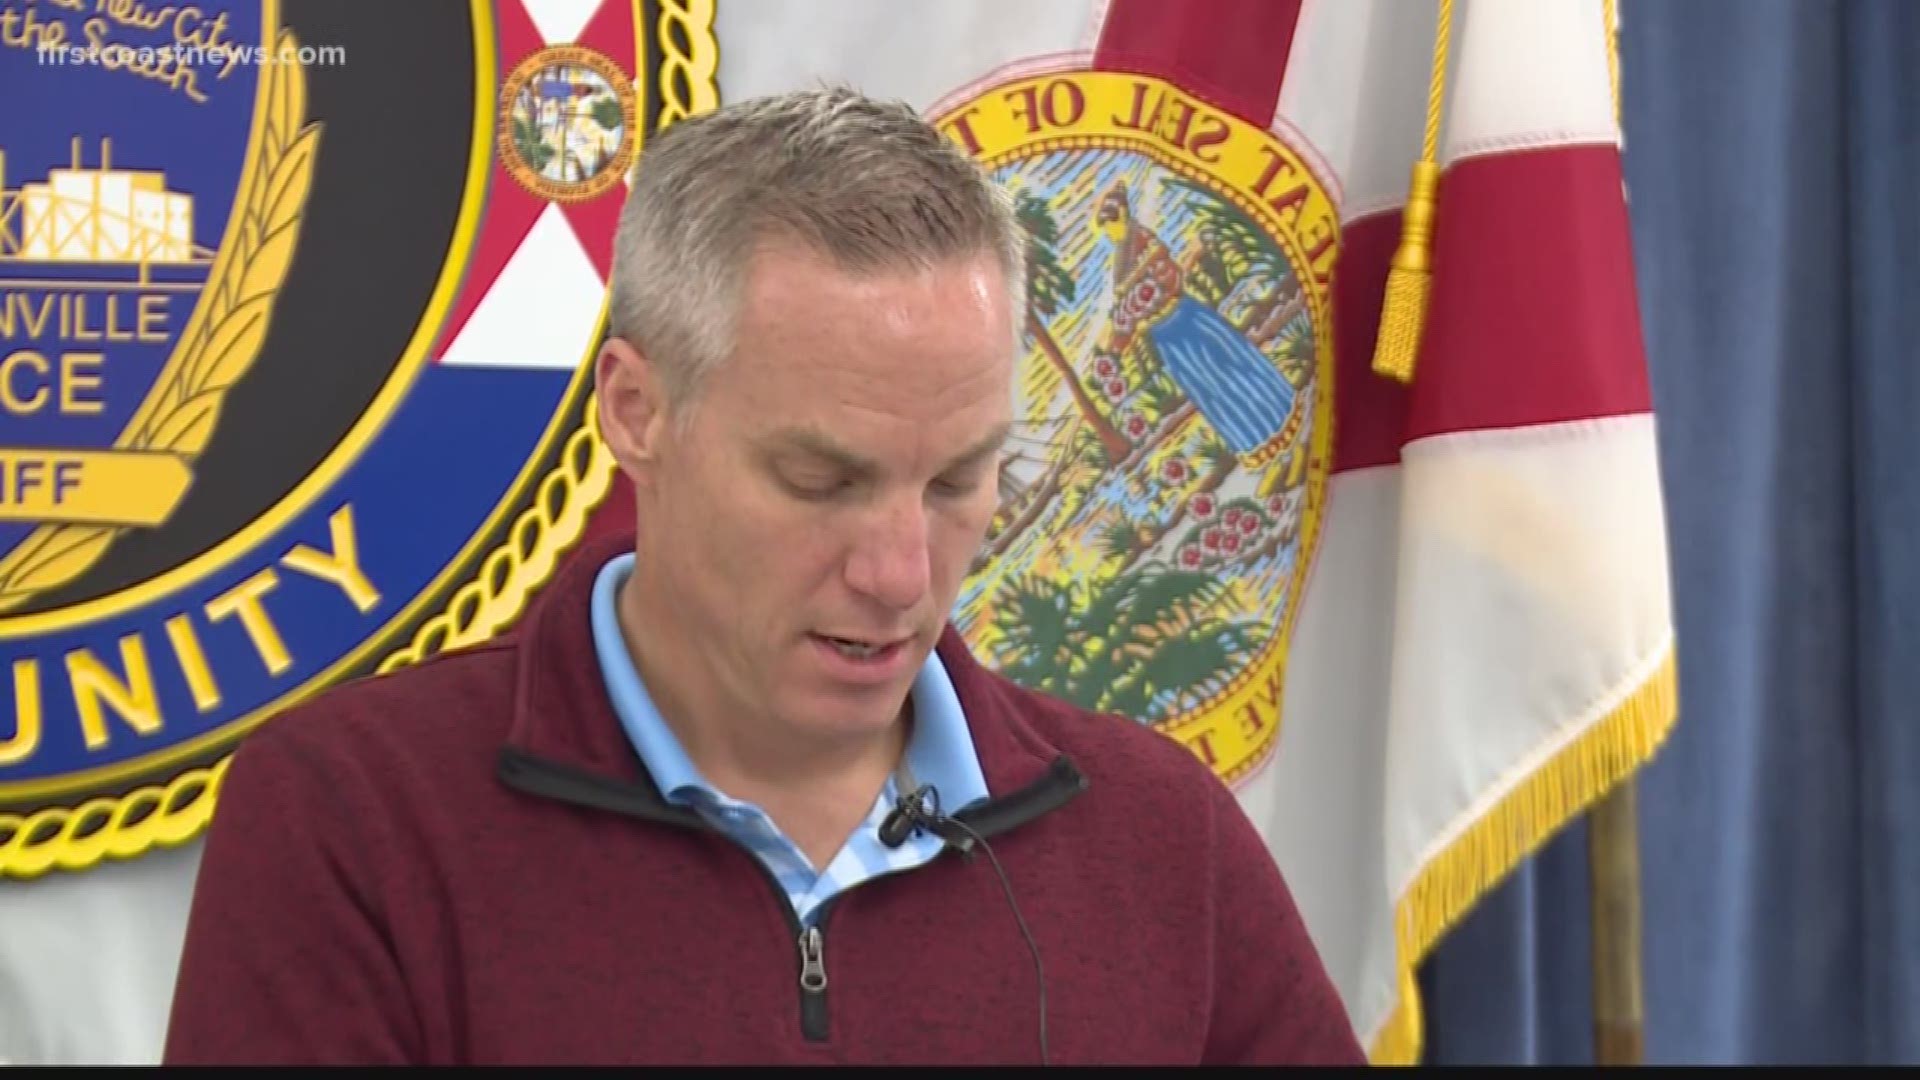 The Jacksonville Sheriff's held a news conference Thursday regarding two separate officer-involved shootings that occurred within hours of each other.